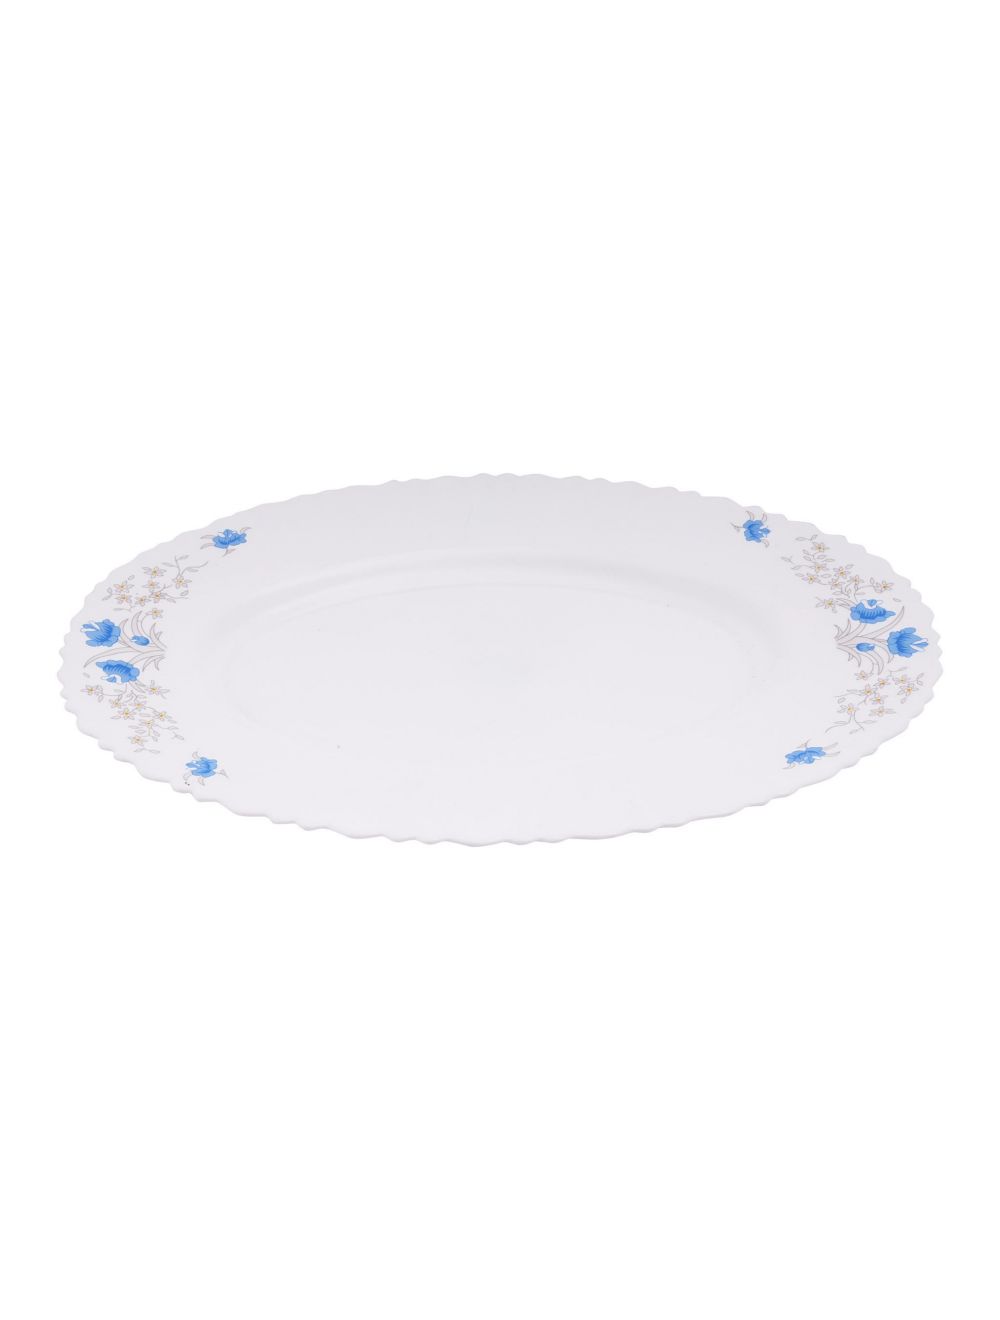 Royalford RF5683 Opal Ware Oval Plate, 14 Inch